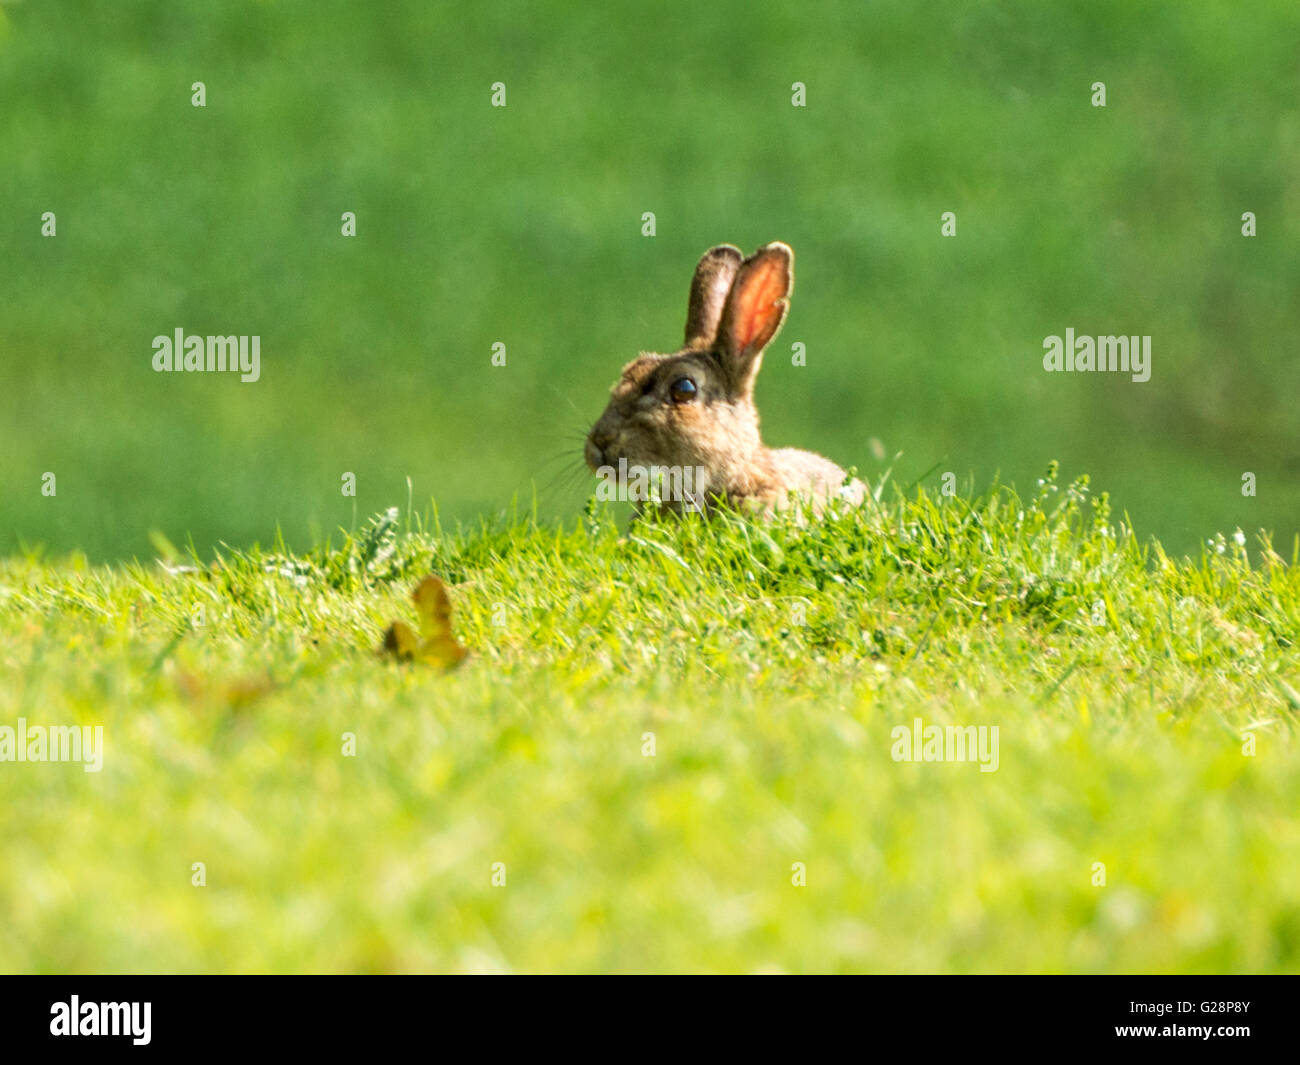 Wild European Rabbit (Oryctolagus cuniculus) depicted surveying its surroundings, isolated against green grass background. Stock Photo